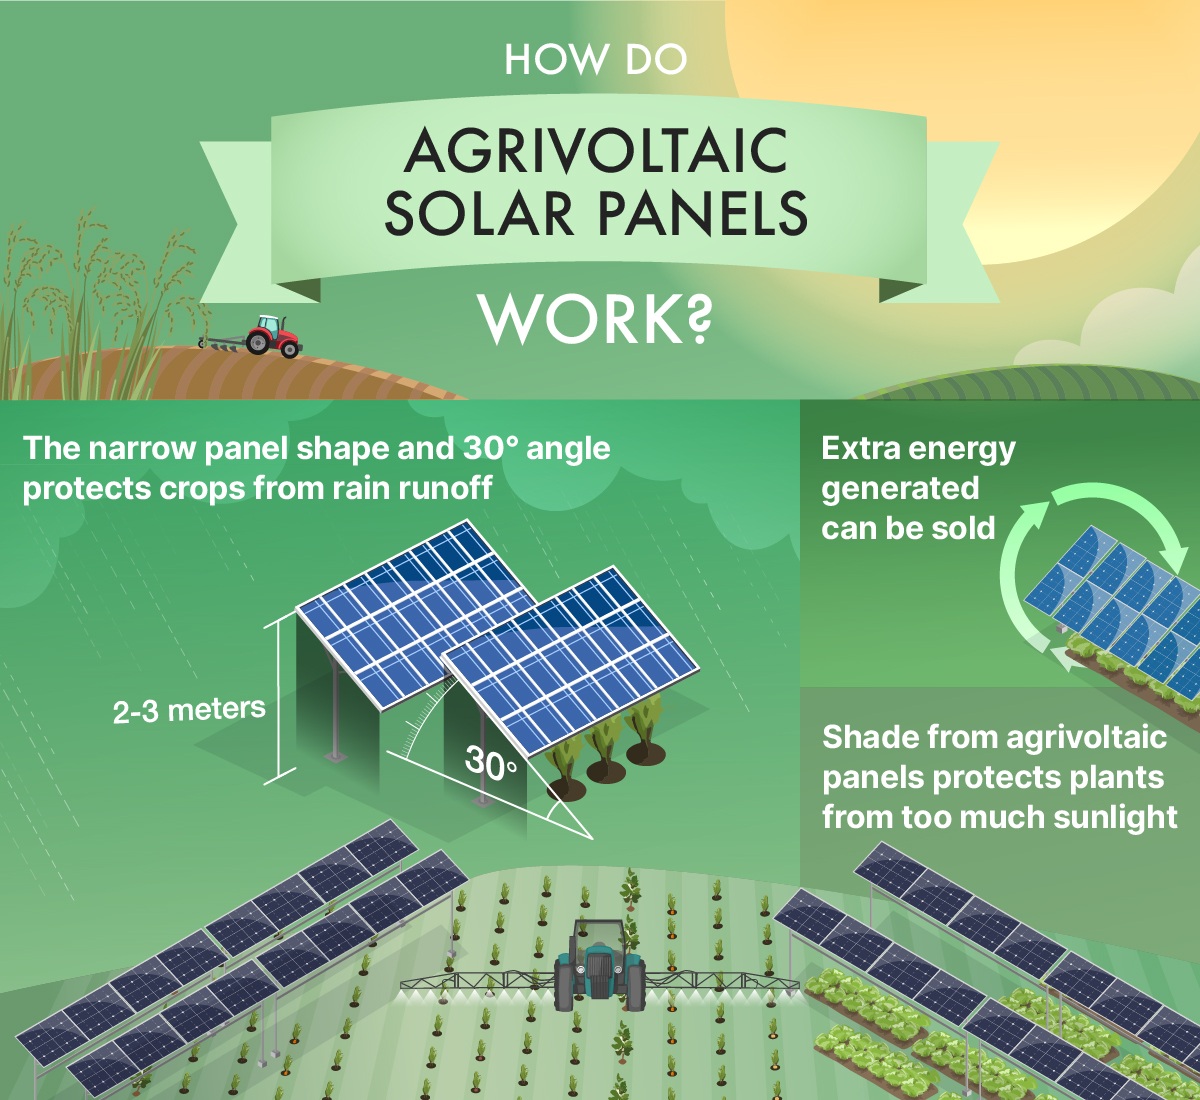 Solar panels used in agrivoltaics utilize a narrow shape and are installed at a 30 degree angle to protect crops.